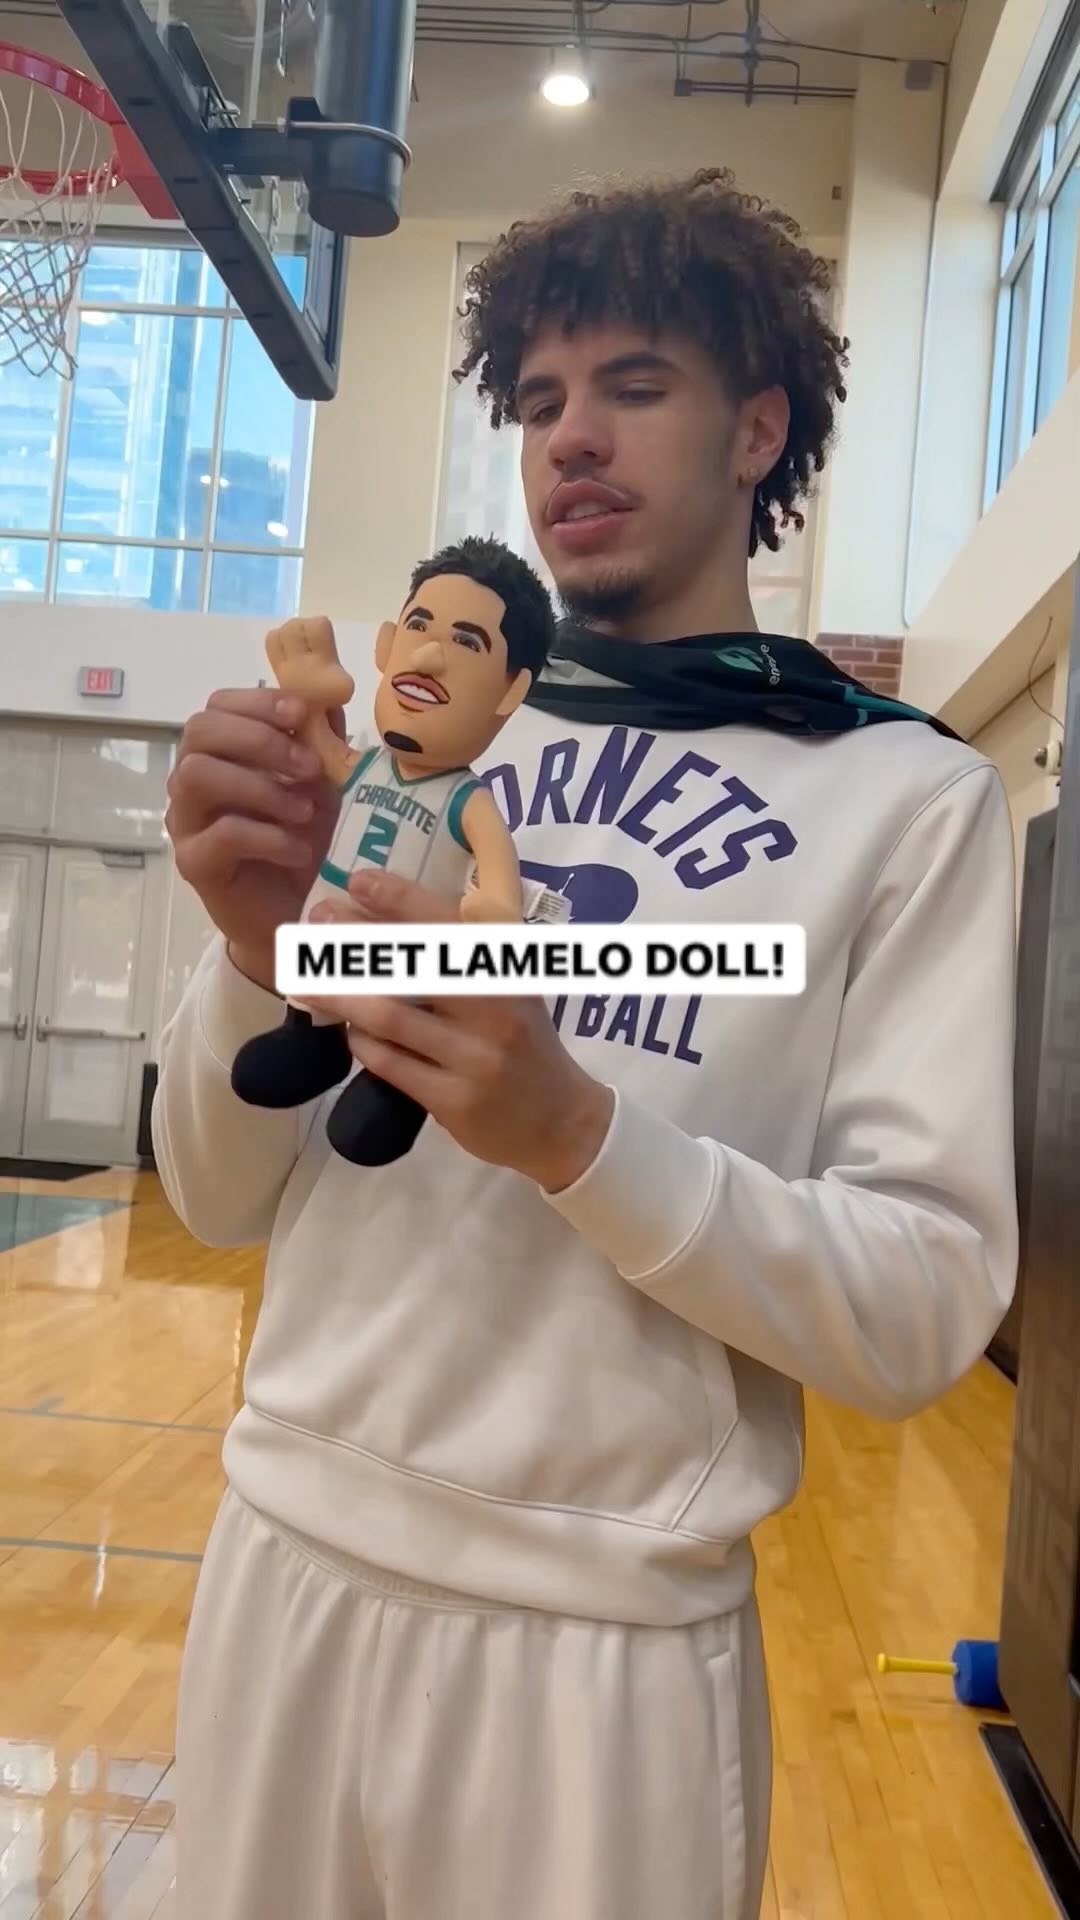 MEET LAMELO DOLL! We took him to Cleveland for #NBAAllStar — have you been follo...